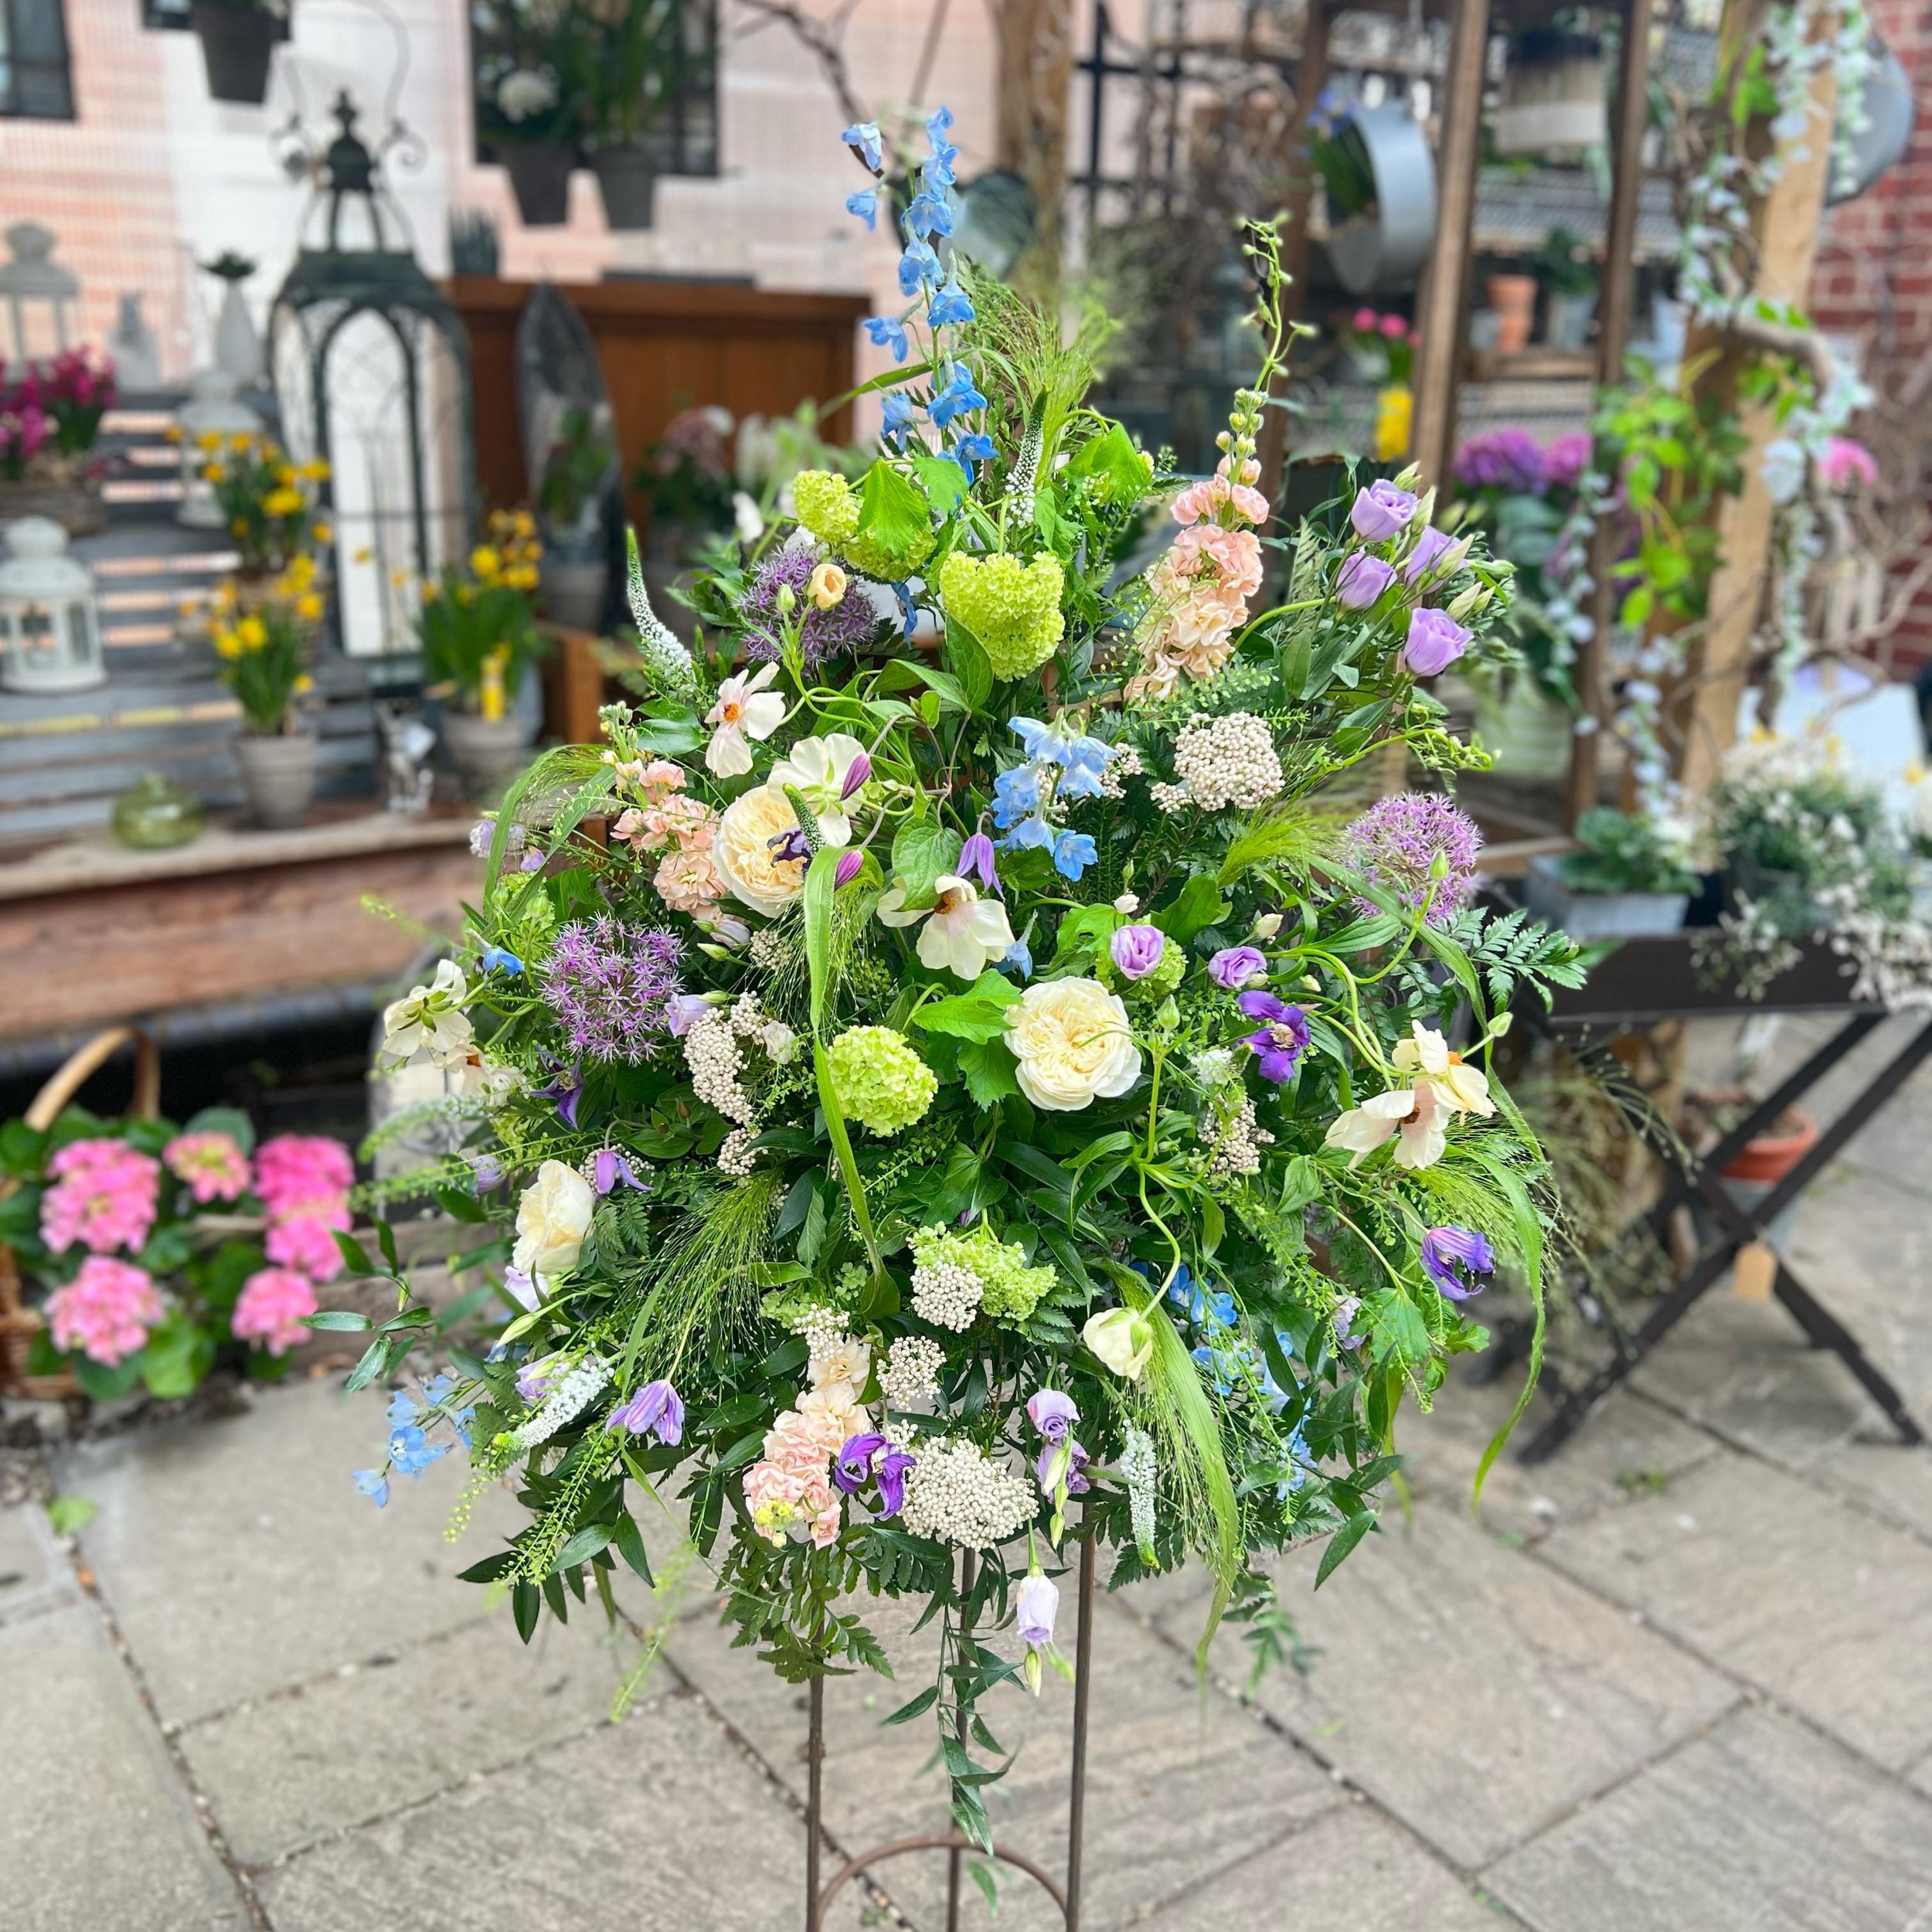 PEDESTAL ARRANGEMENTS✨
One of our favourite features! A gorgeous statement piece perfect for weddings, parties, christenings, events &amp; funerals 🌸 Whether you prefer it on a milk churn, apple crate or just as it comes, we provide it all🤍
Get in 